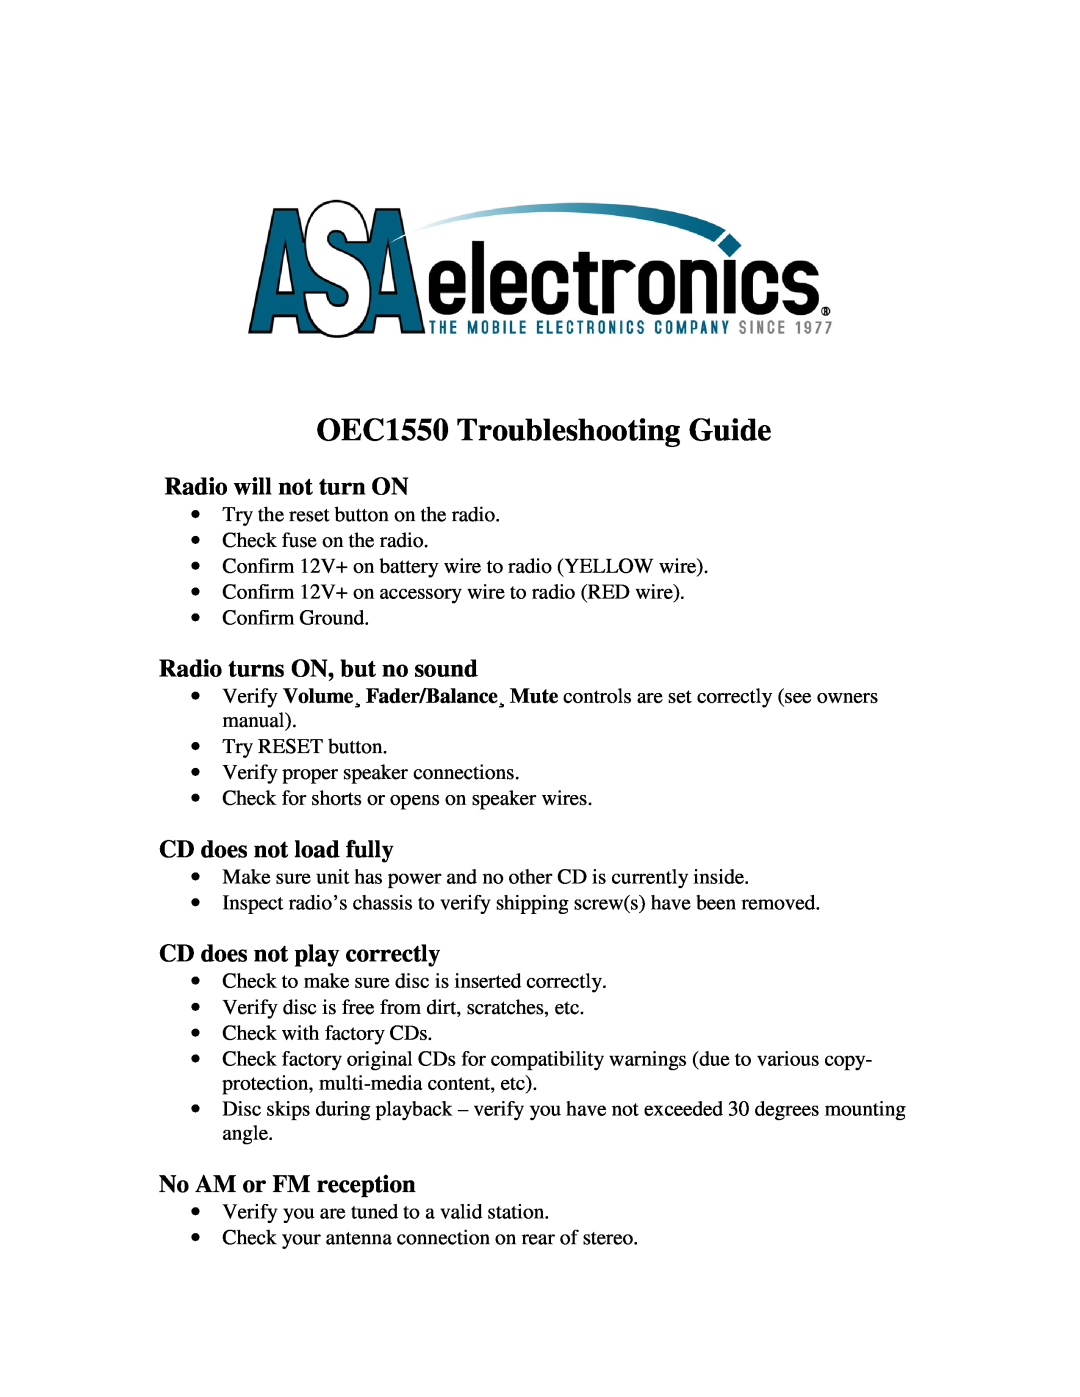 ASA Electronics OEC1550 owner manual Radio will not turn ON, Radio turns ON, but no sound, CD does not load fully 